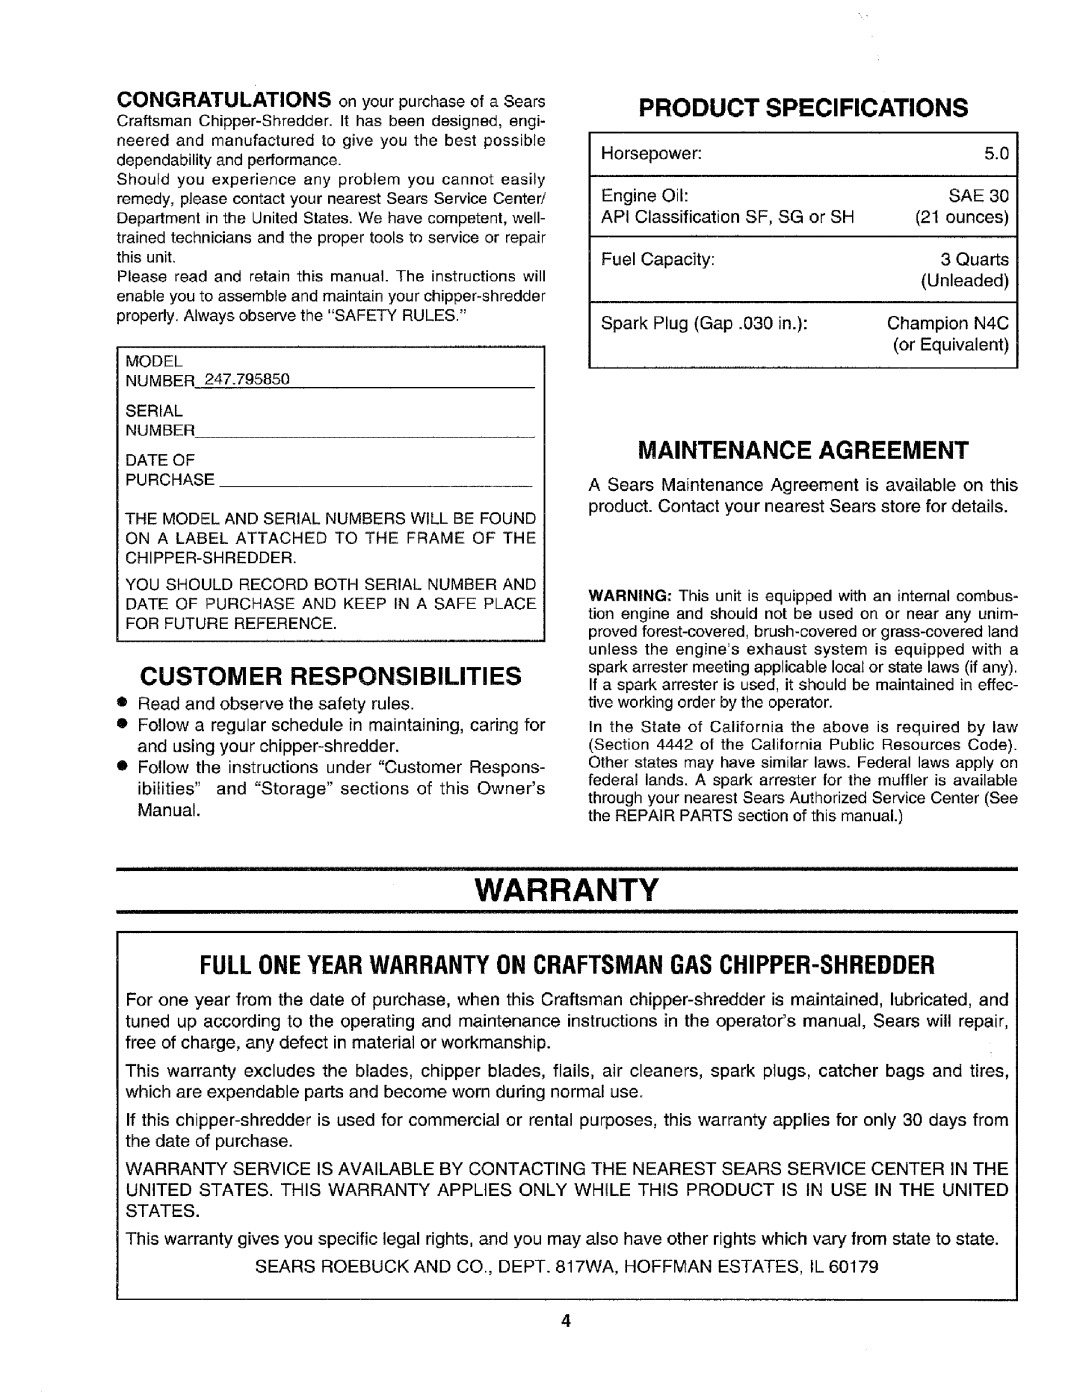 Craftsman 79585 manual Warranty, Customer Responsibilities, Product Specifications, Maintenance Agreement 